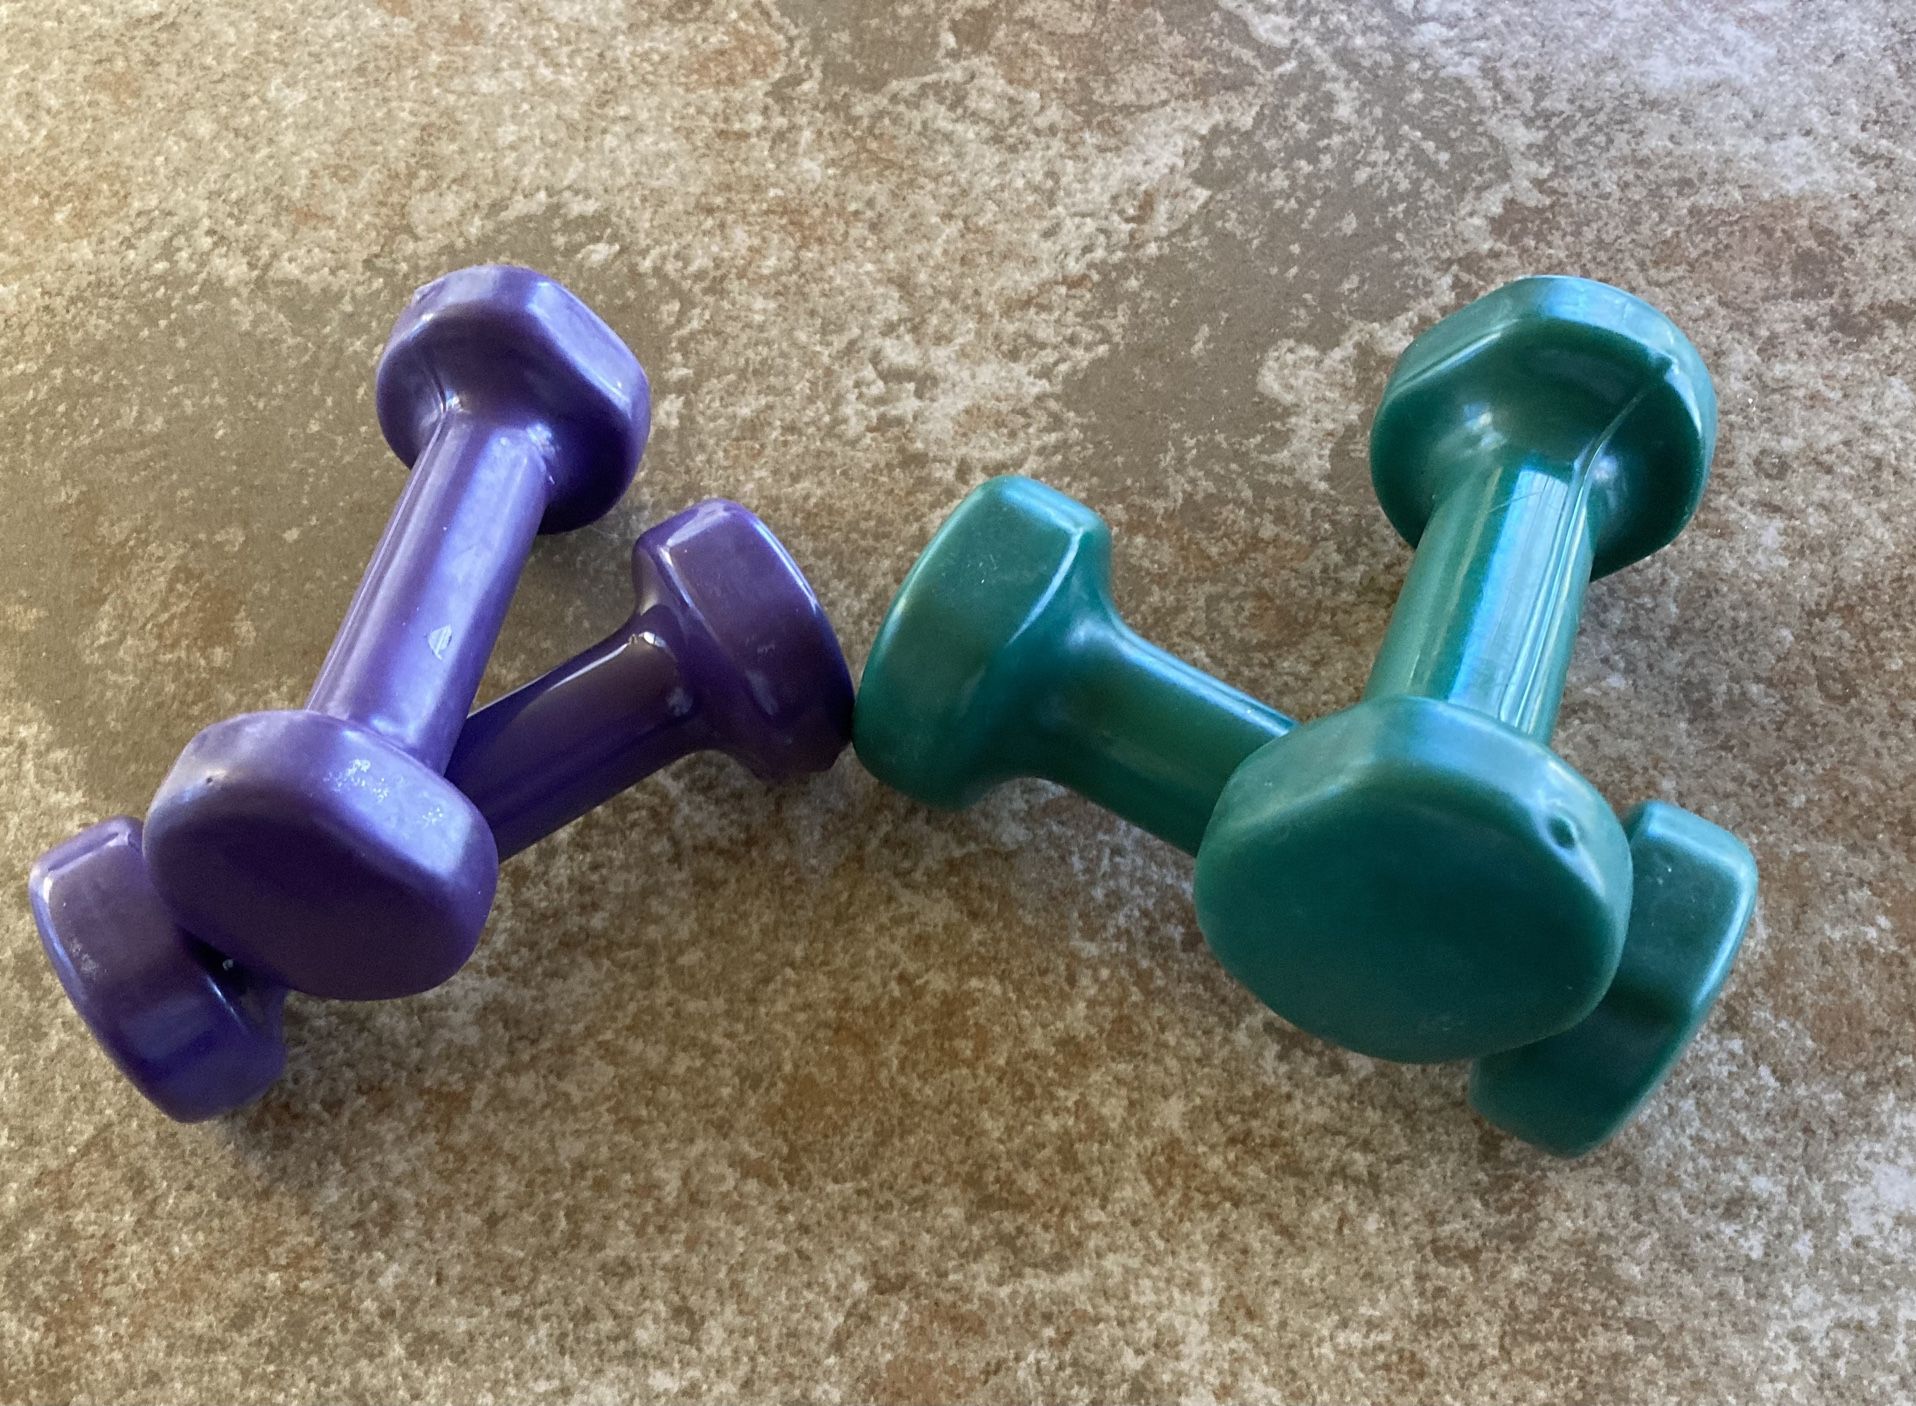 2 & 3 LBS. RUBBER COATED DUMBBELLS 